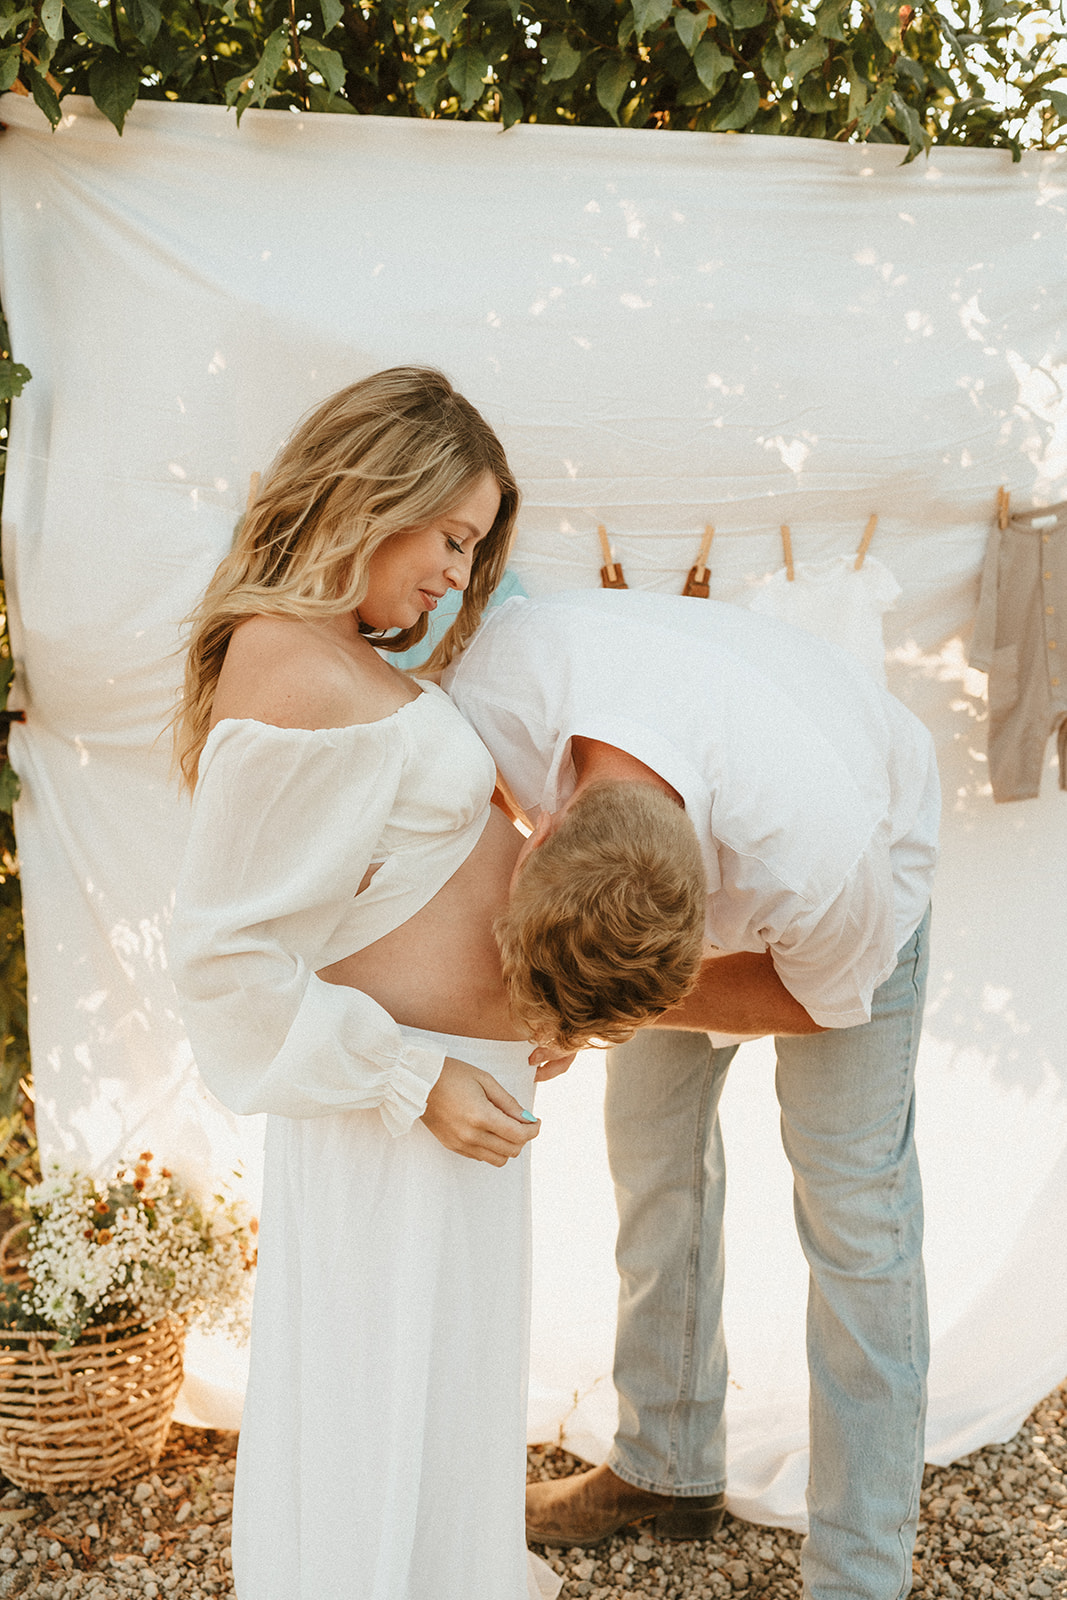 Blonde mother-to-be, radiantly pregnant with a white boho, bell-sleeved top and flowing white skirt stands as father-to-be kisses her belly. Pregnant mother and father stand in front of a flowing white sheet billowing in the wind. A clothesline lined with baby clothes is draped across the white sheet. The image is tinted with golden light from sunset. A basket of florals sits in the bottom left corner of the image.